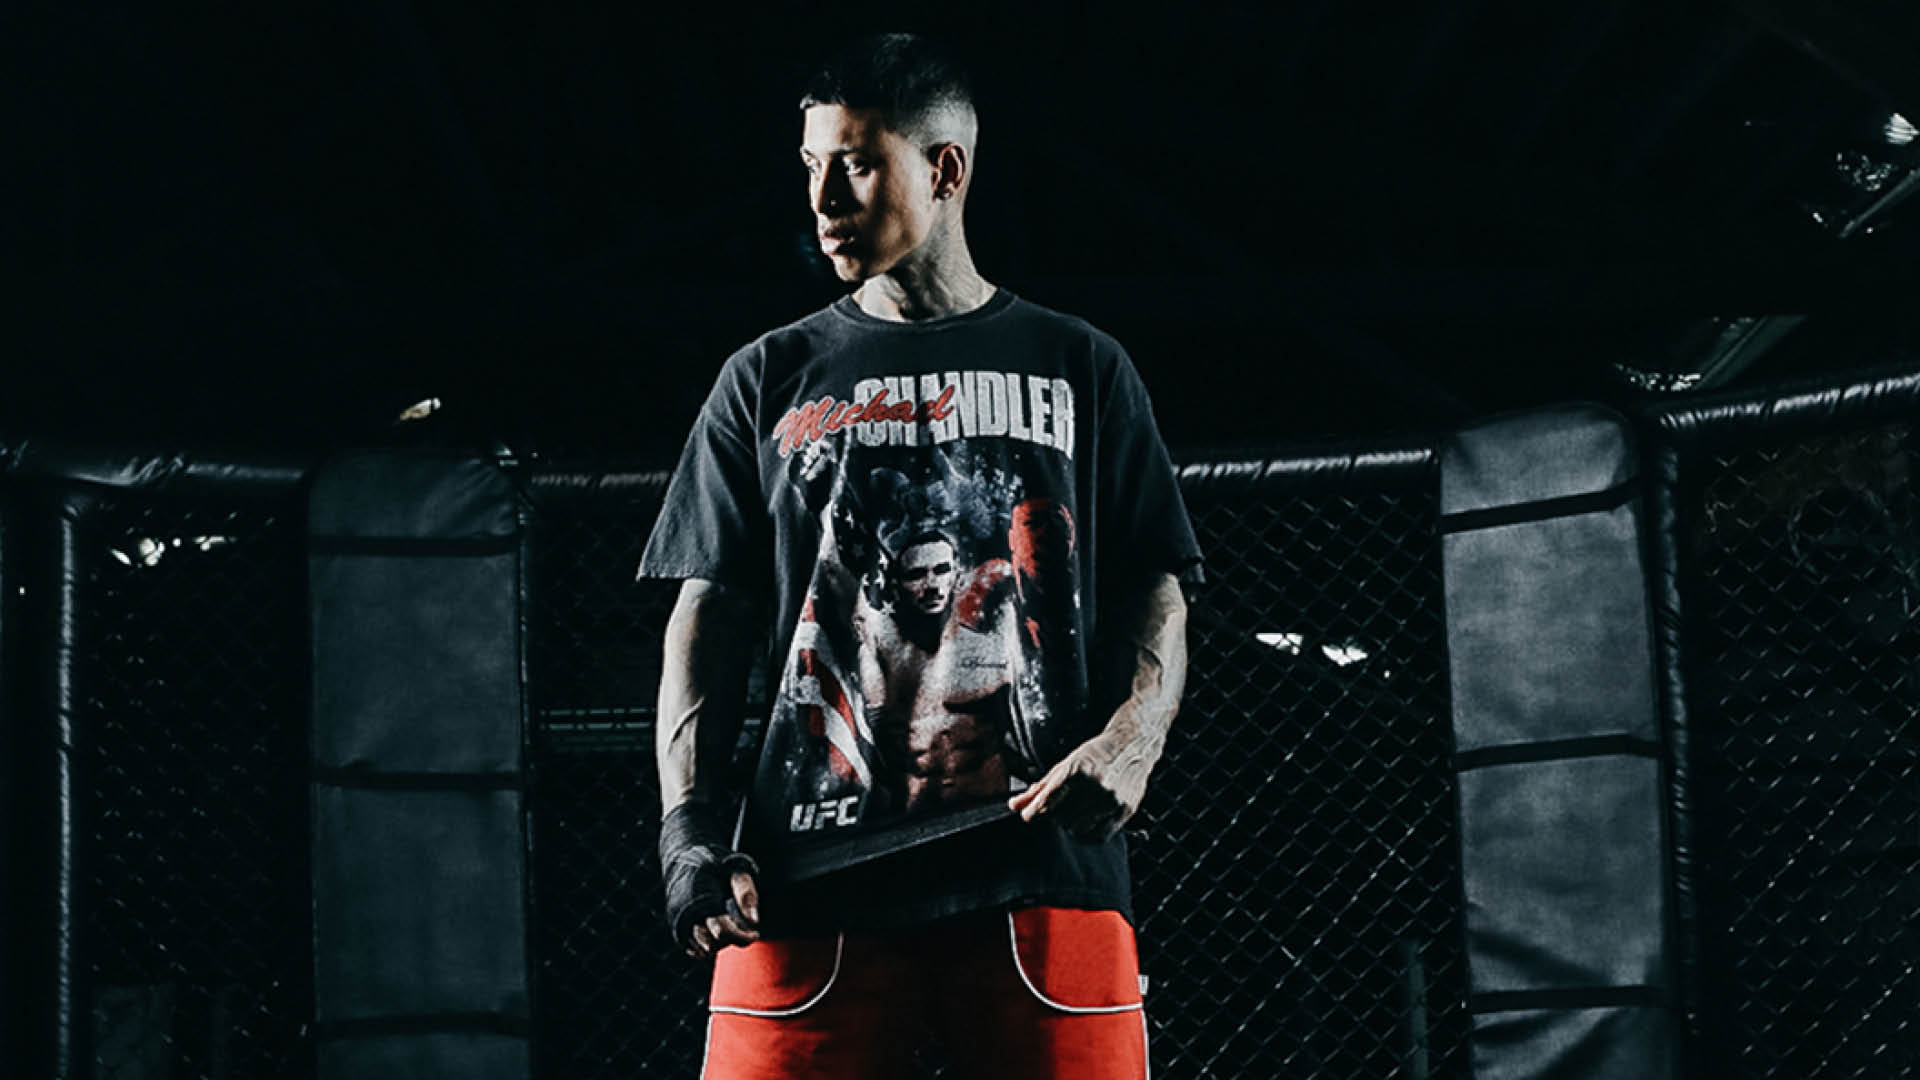 UFC Wear is a Big Win with Fans | License Global